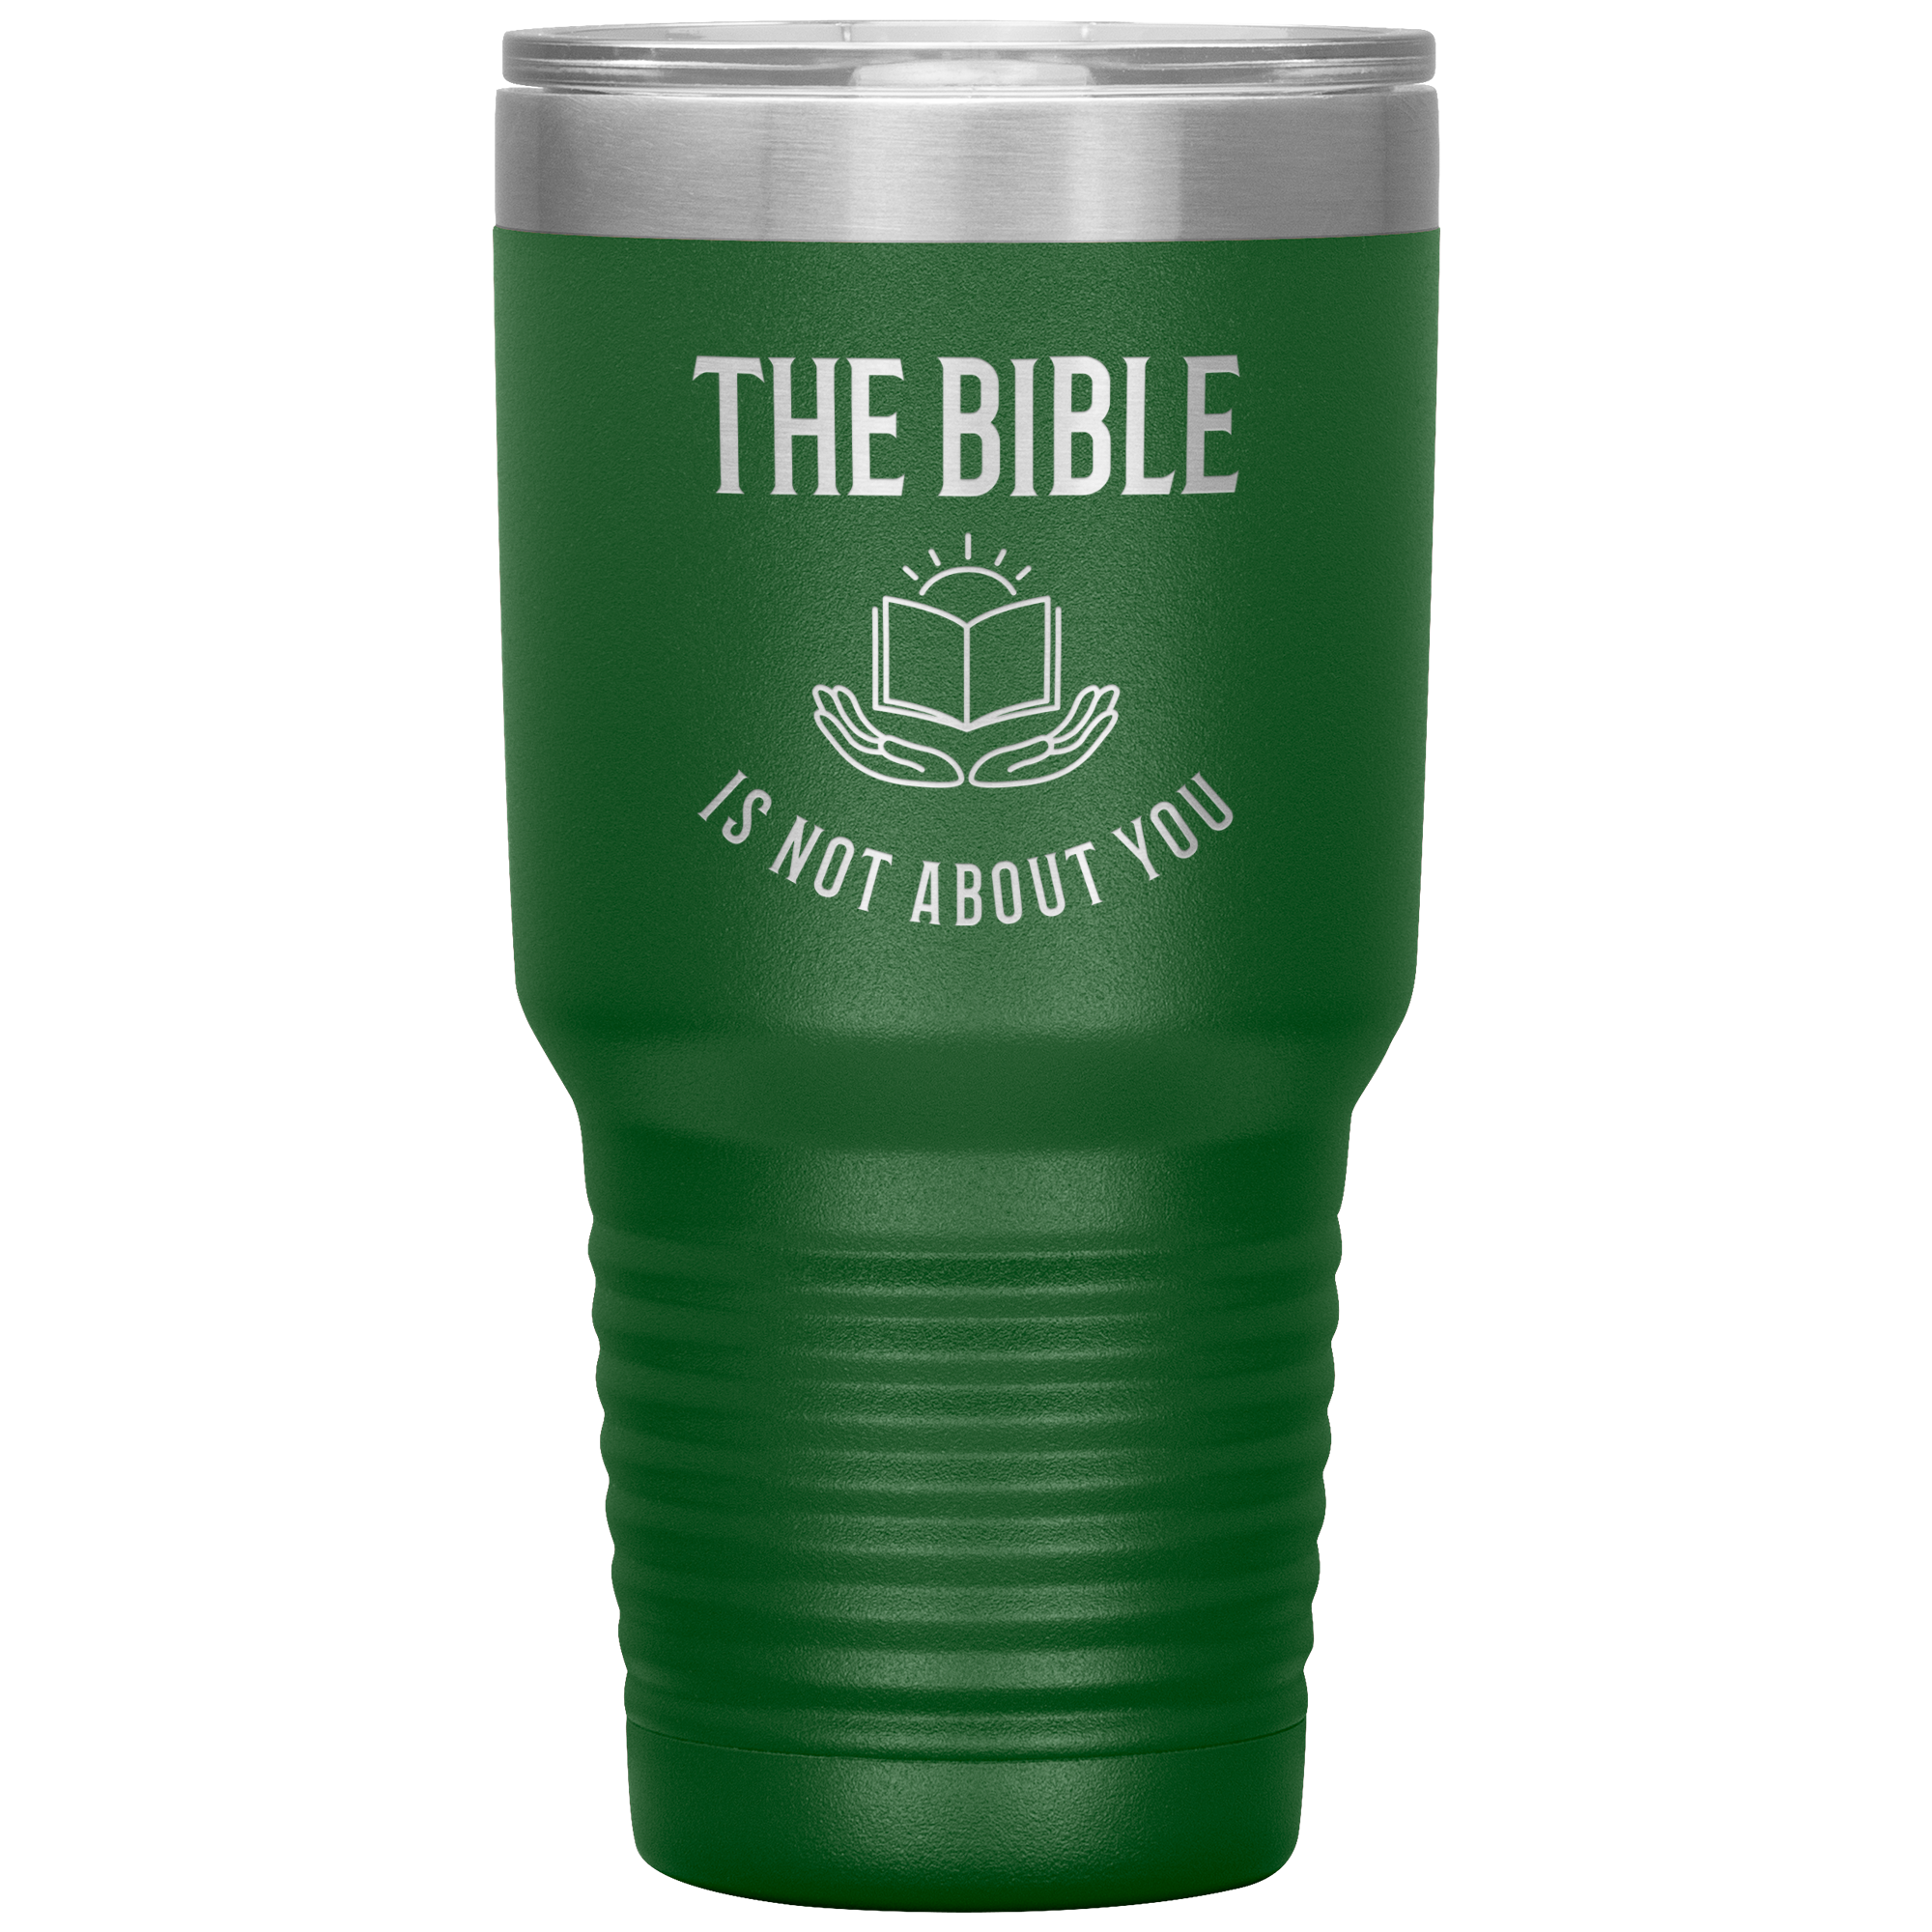 The Bible is not About You (30oz Stainless Steel Tumbler)